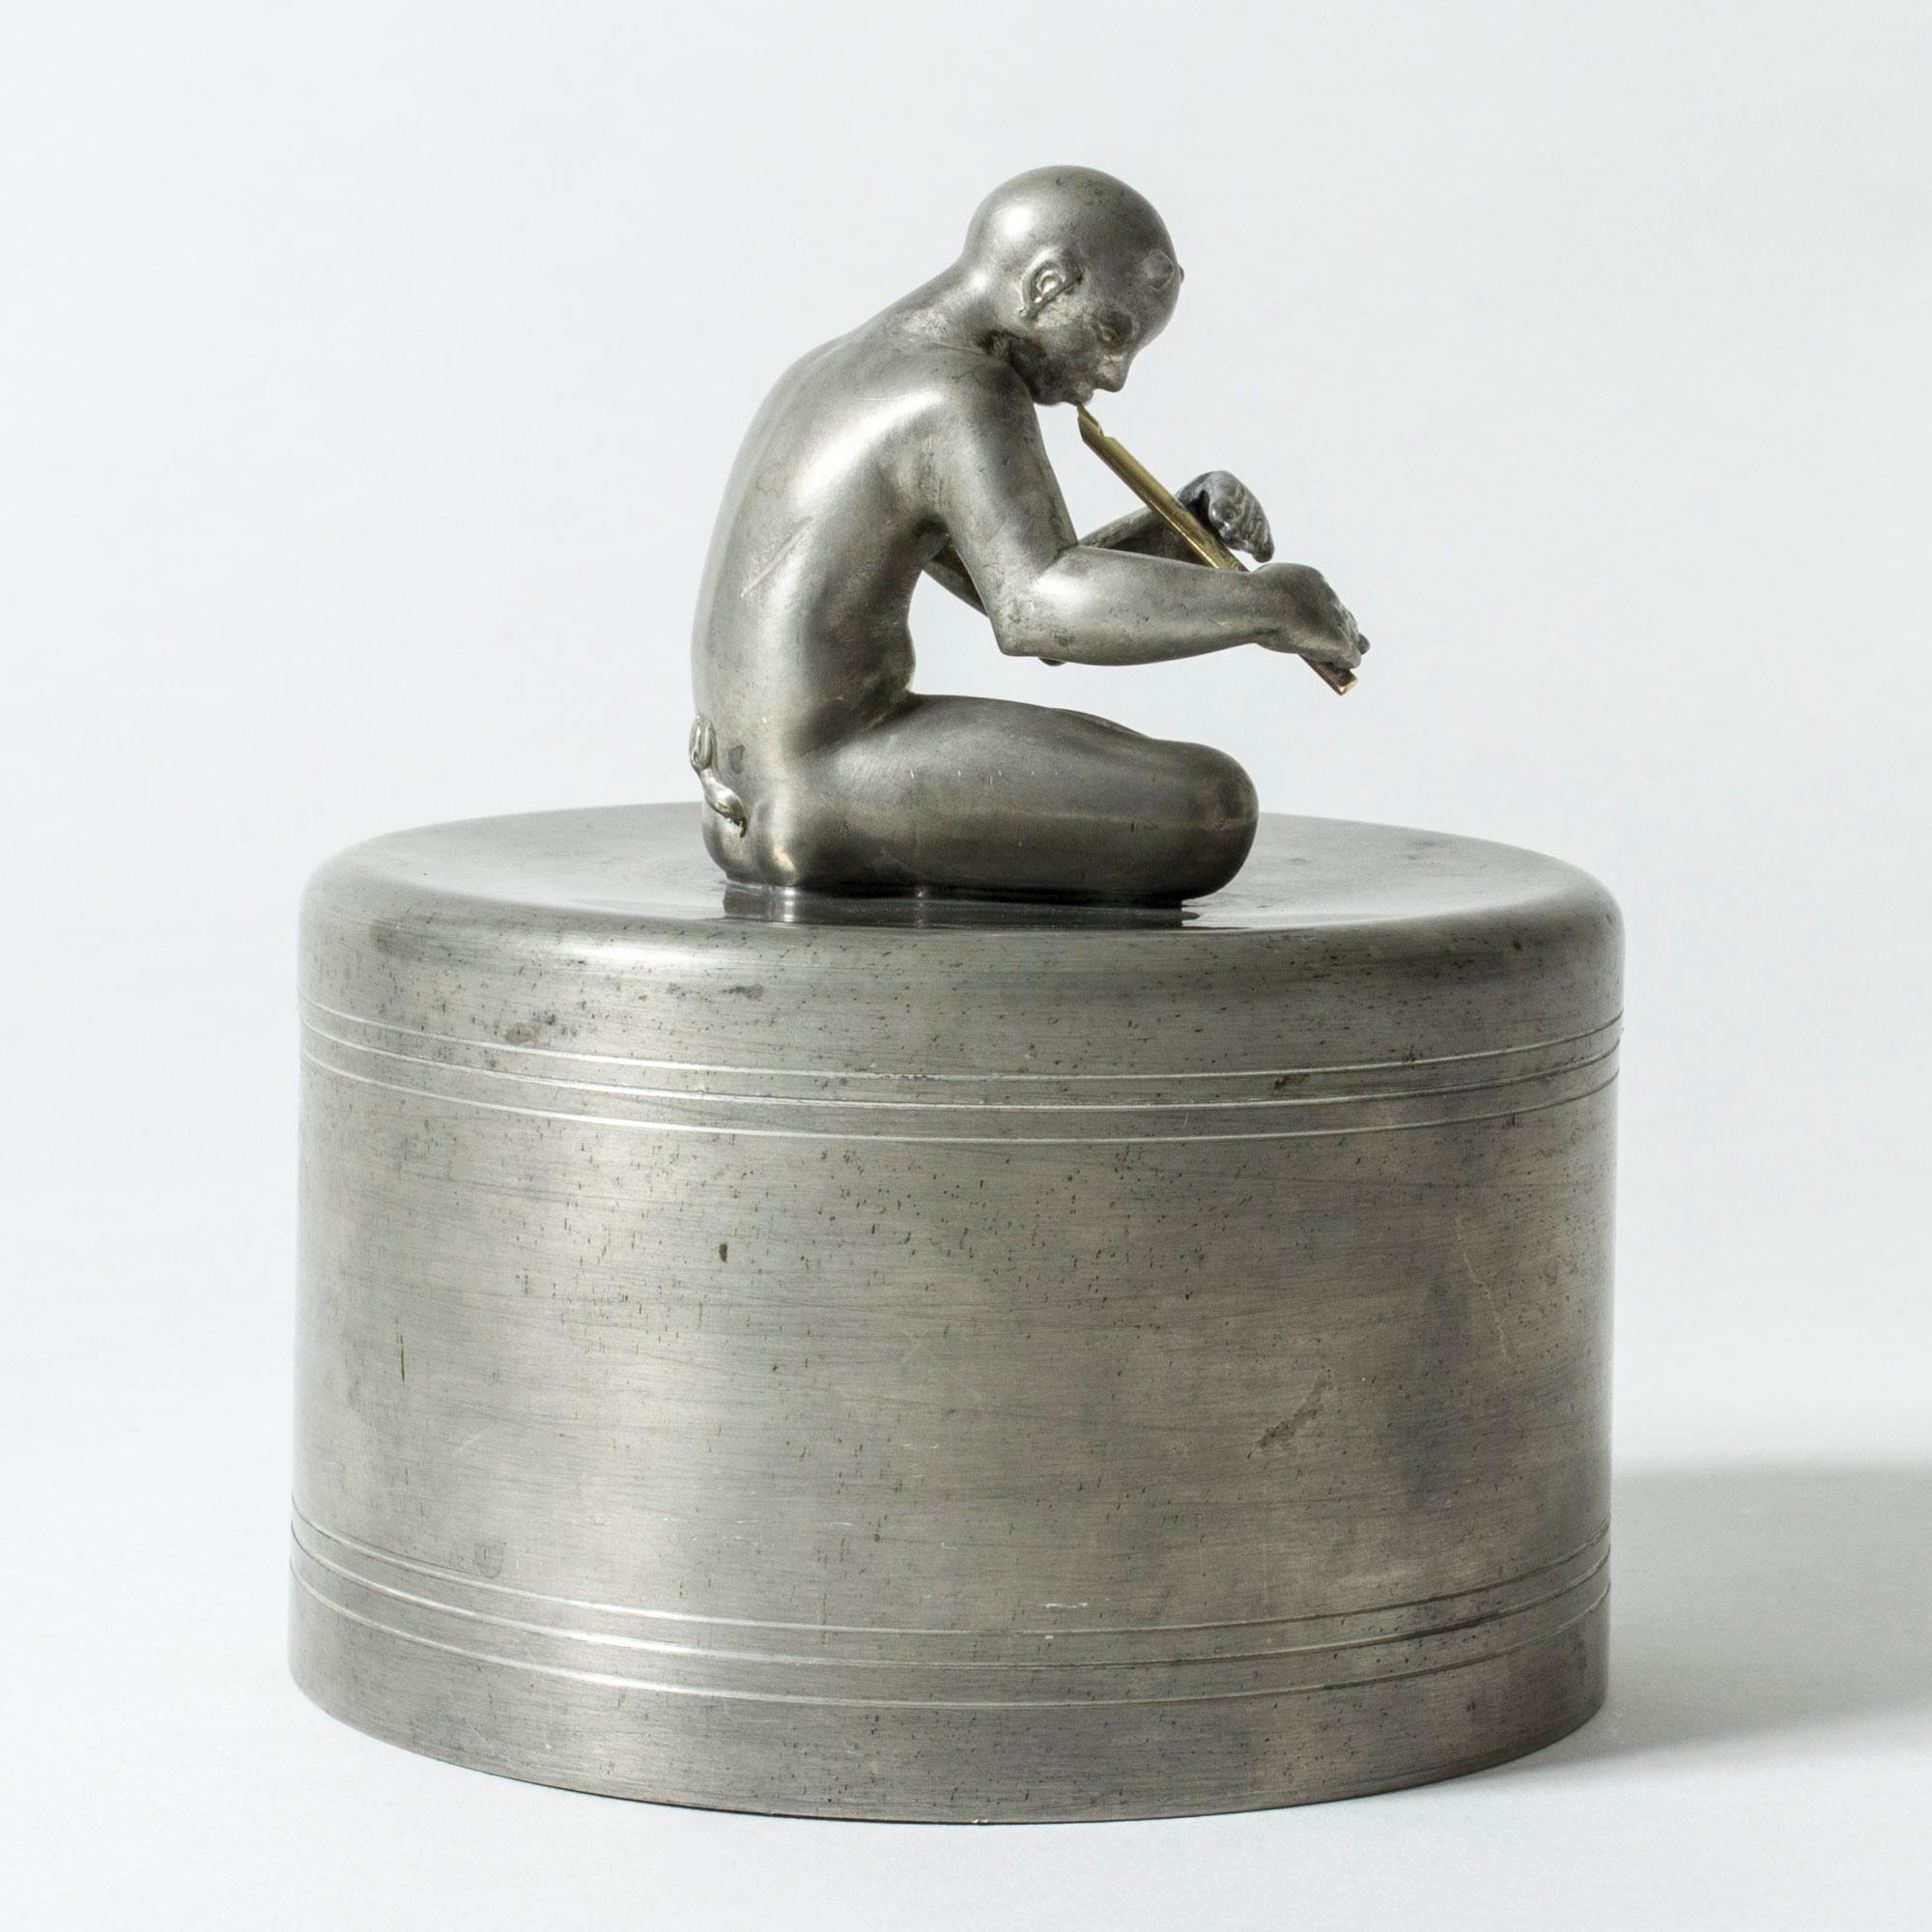 Amazing pewter jar by Nils Fougstedt, adorned with a flute playing, crosslegged Pan figurine. The tiny flute is made from brass. Beautifully sculpted figurine with attention to detail and an elegantly relaxed pose.